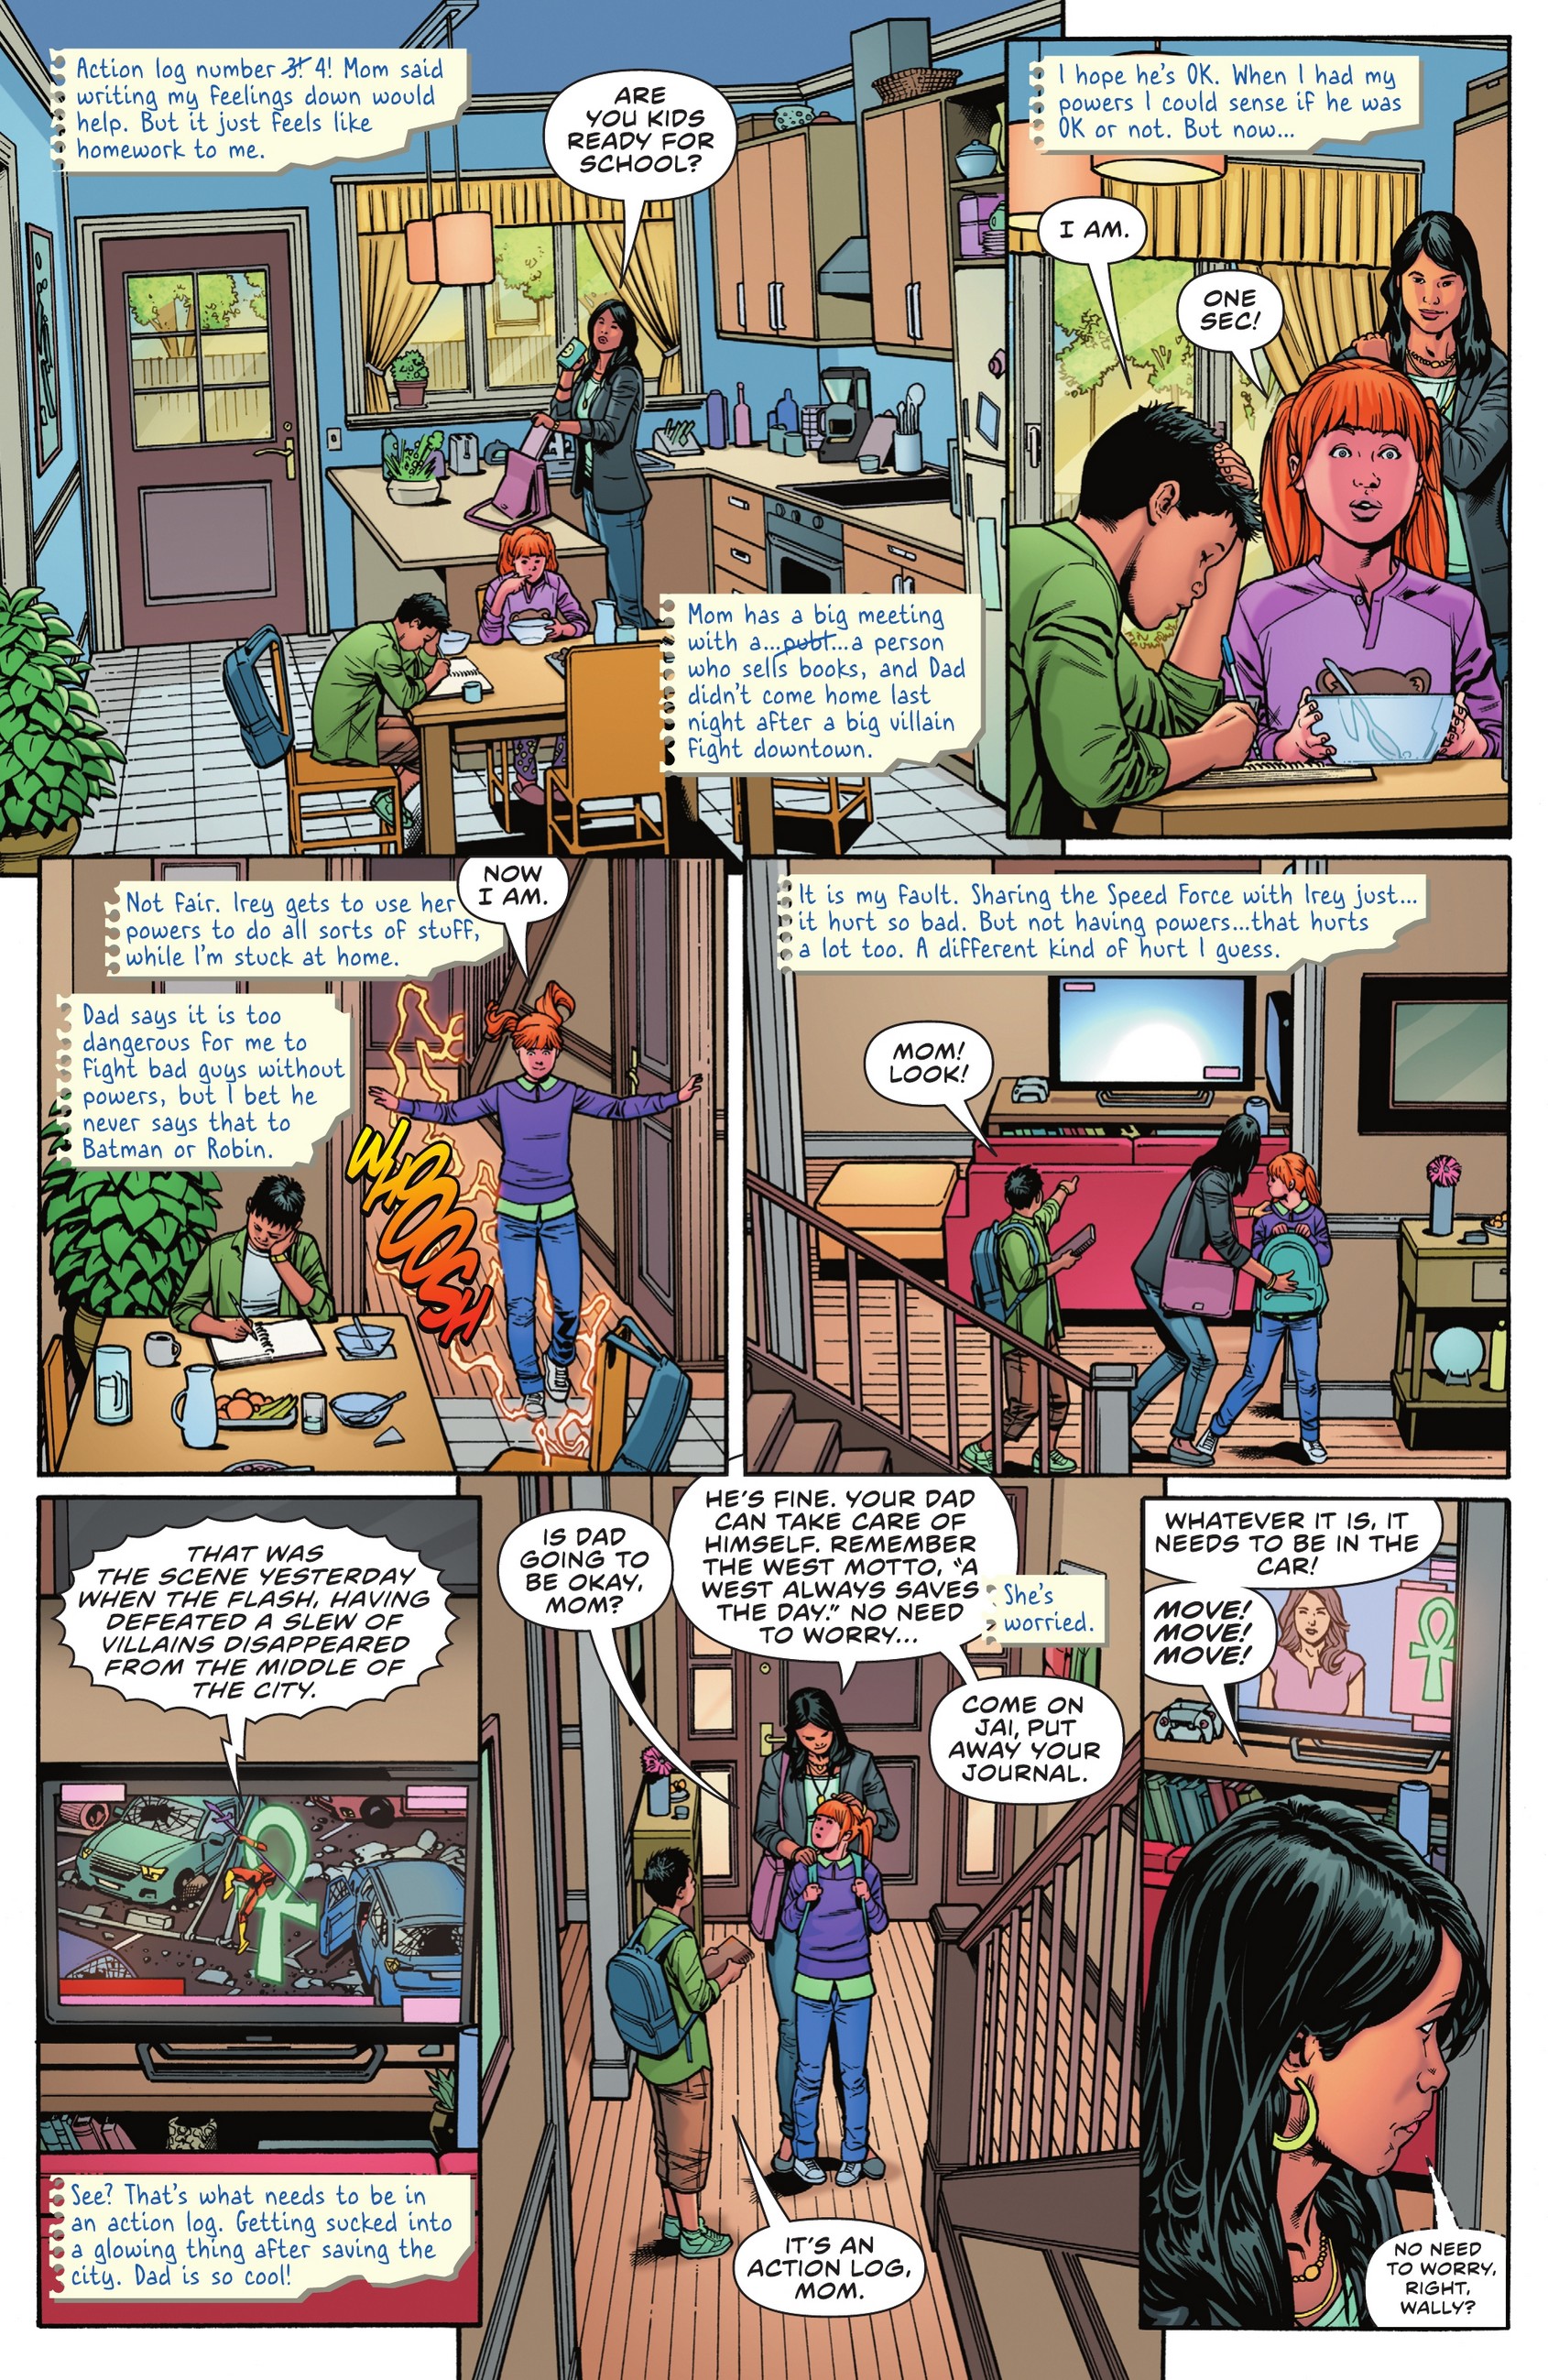 The Flash (2016-): Chapter 777 - Page 3